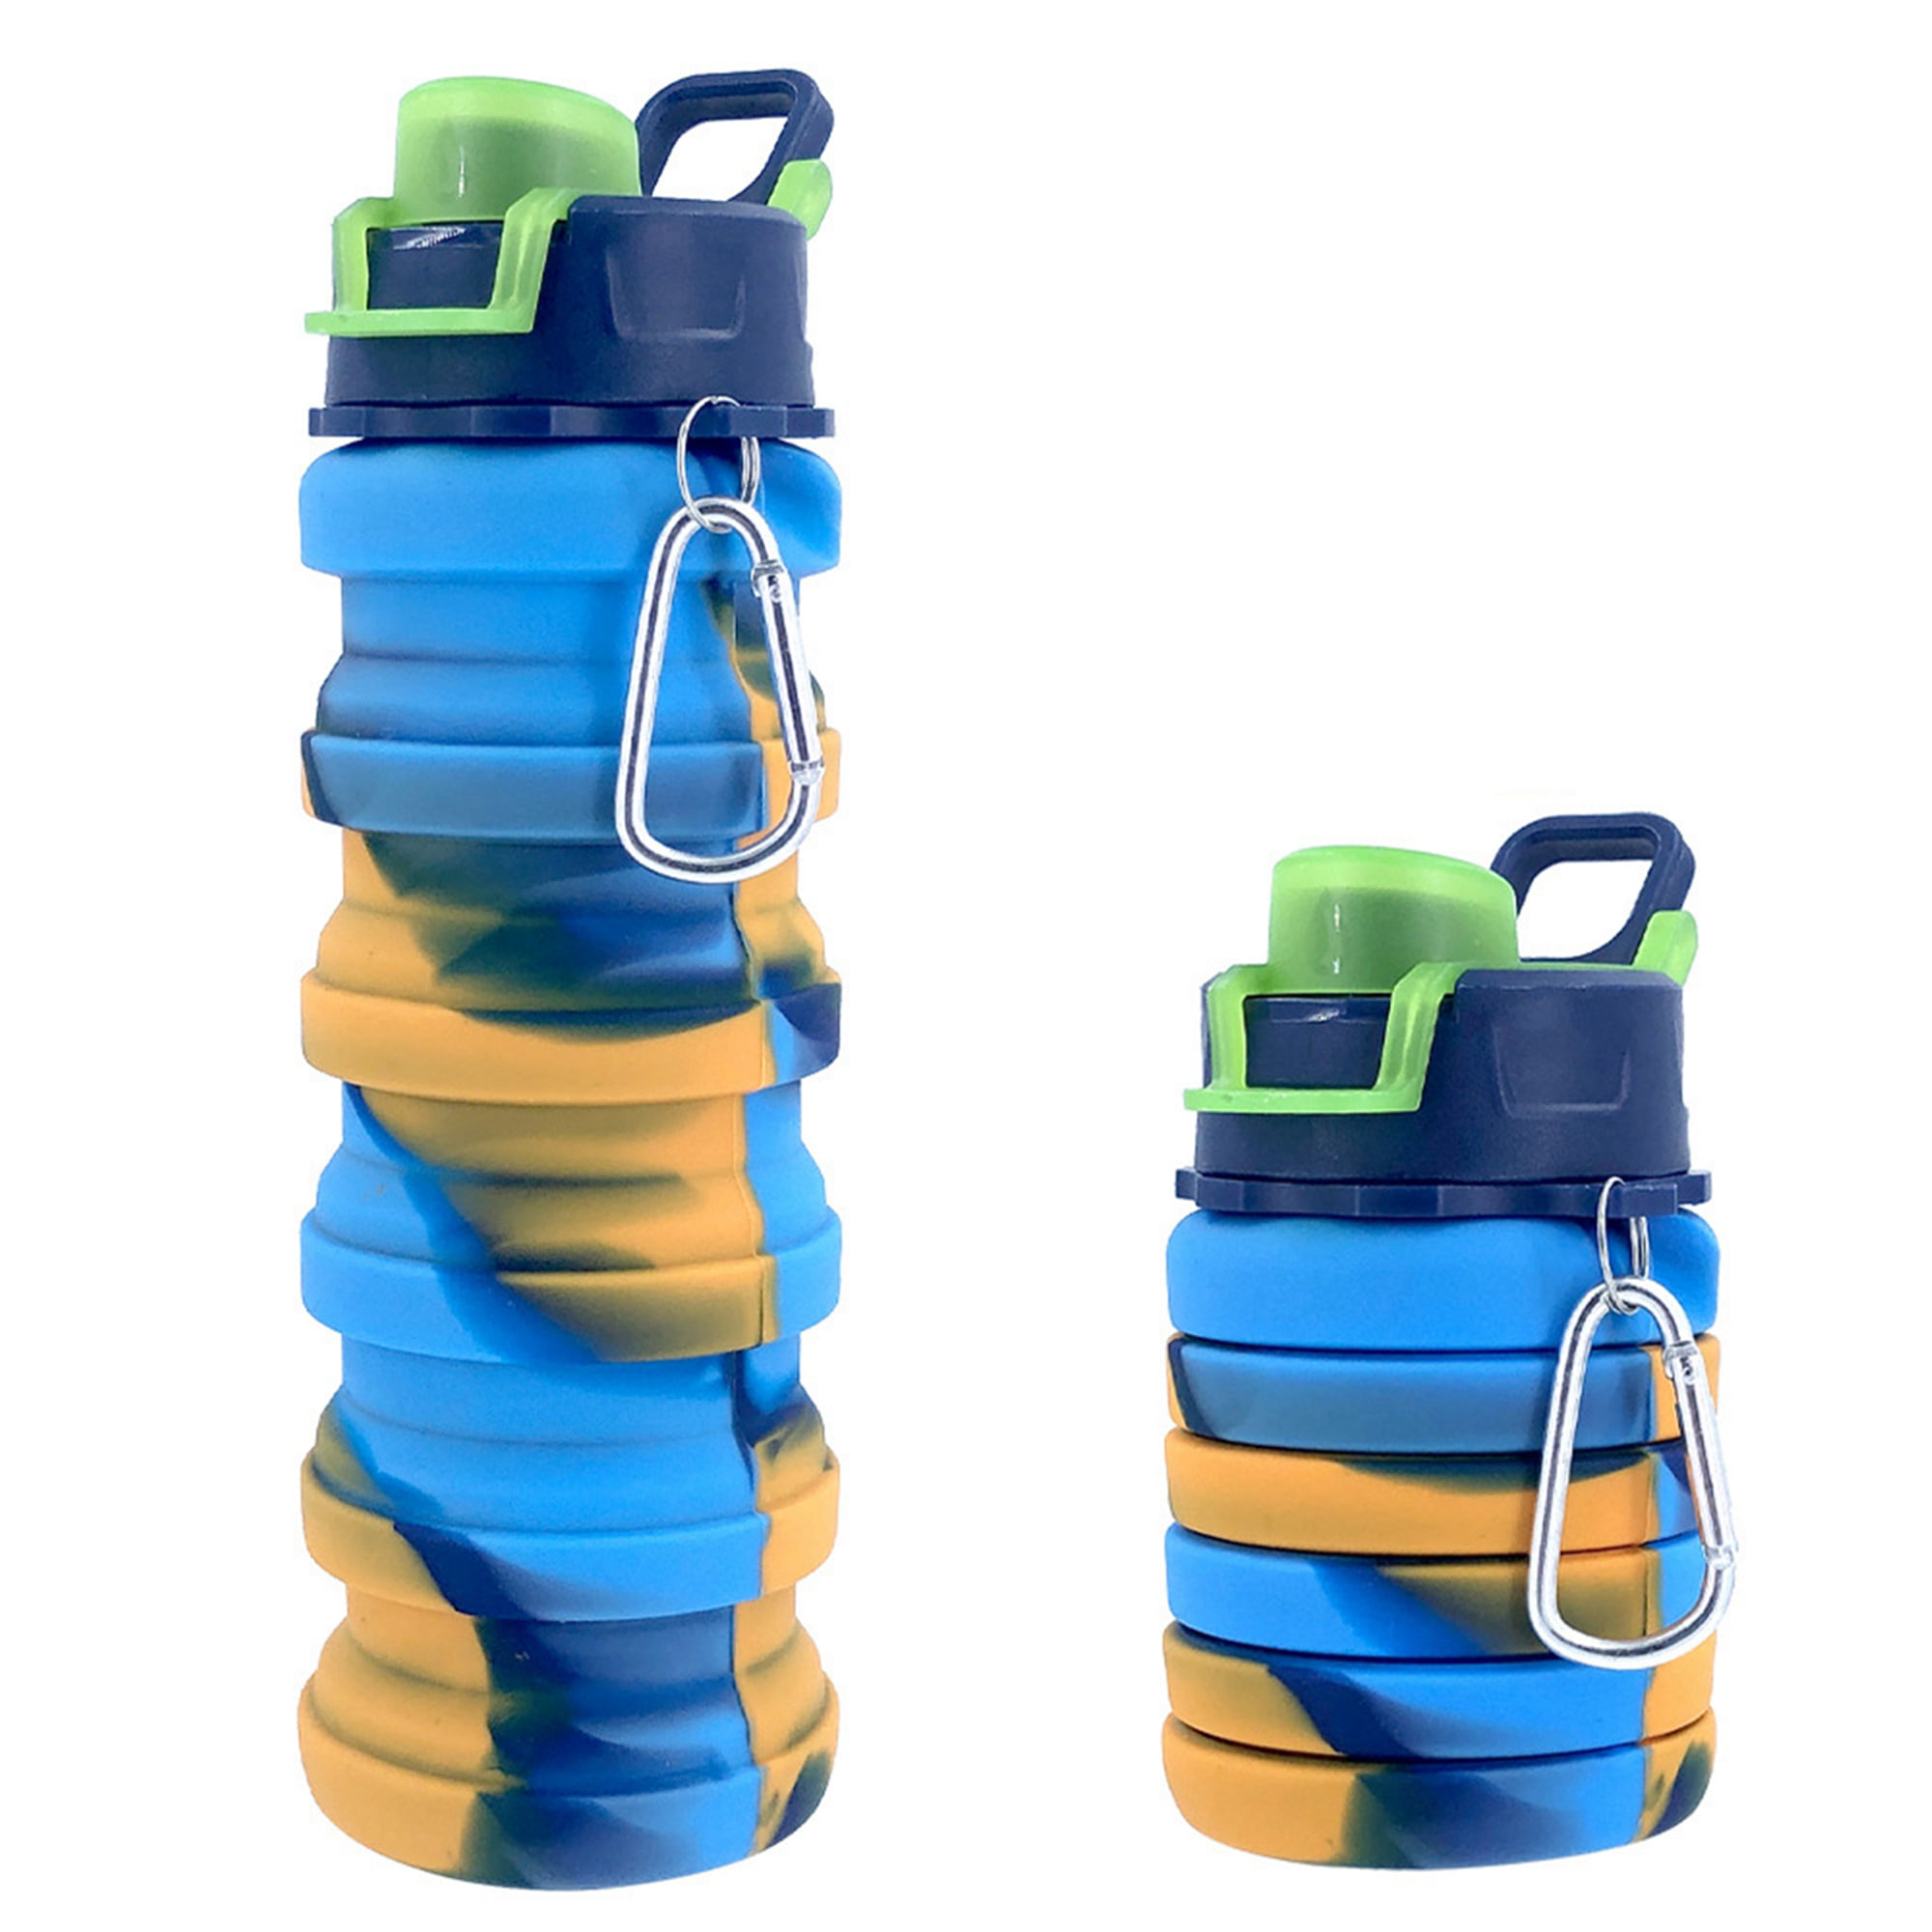  byoki Collapsible Water Bottle - Premium & BPA Free Silicone  Foldable Hiking Water Bottles, Ideal for Traveling, Leak proof, Lightweight  & Reusable, Great Travel Water Bottle (25oz) Happy Orange : Sports